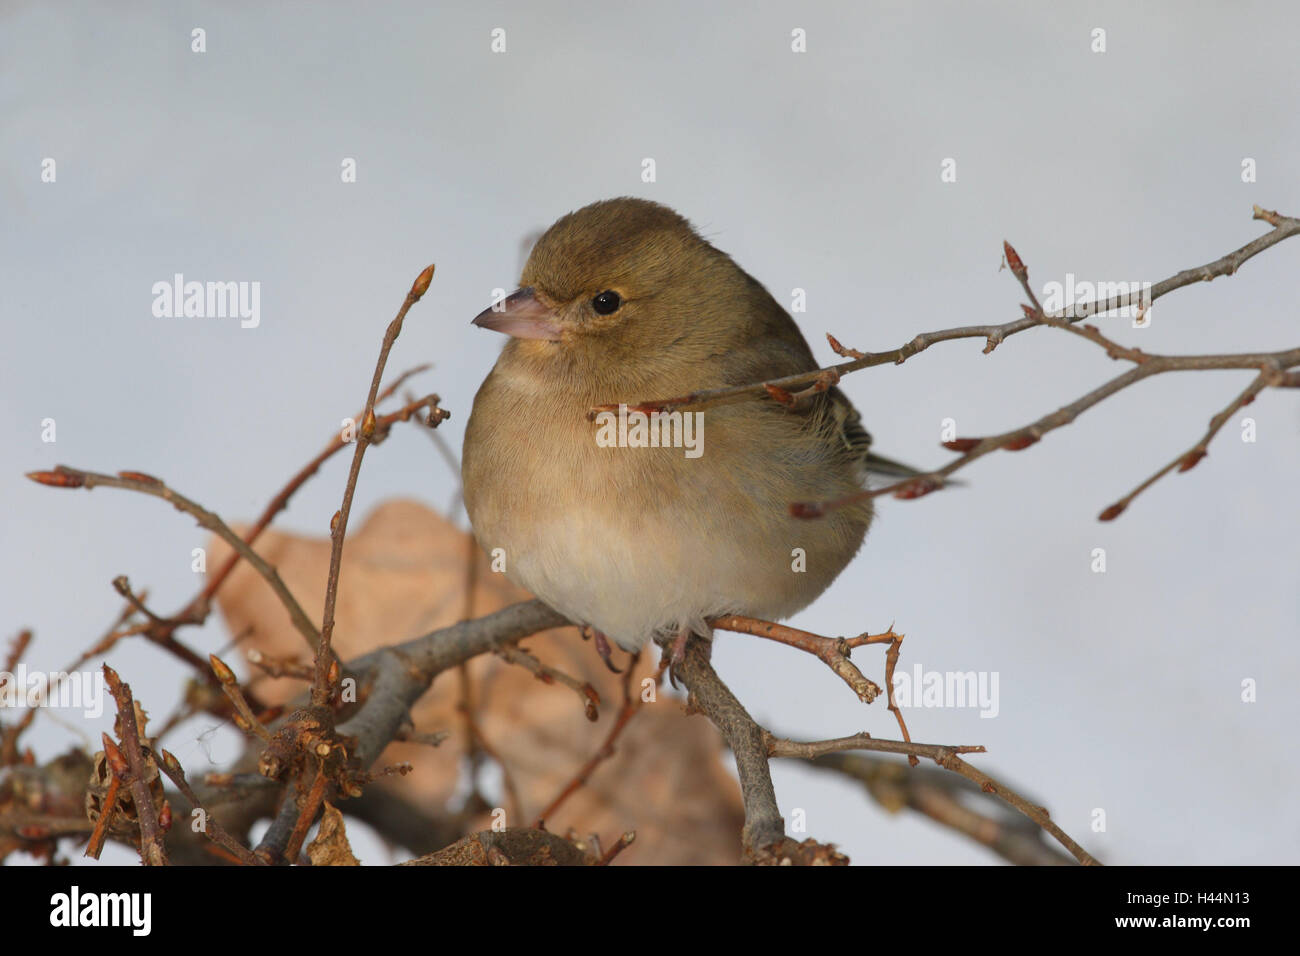 Chaffinch, branche, s'asseoir, side view, oiseau, Songbird, Finch, noble Finch, Sparrow's birds, Winters, animal sauvage, animal, format Paysage, Allemagne, Banque D'Images